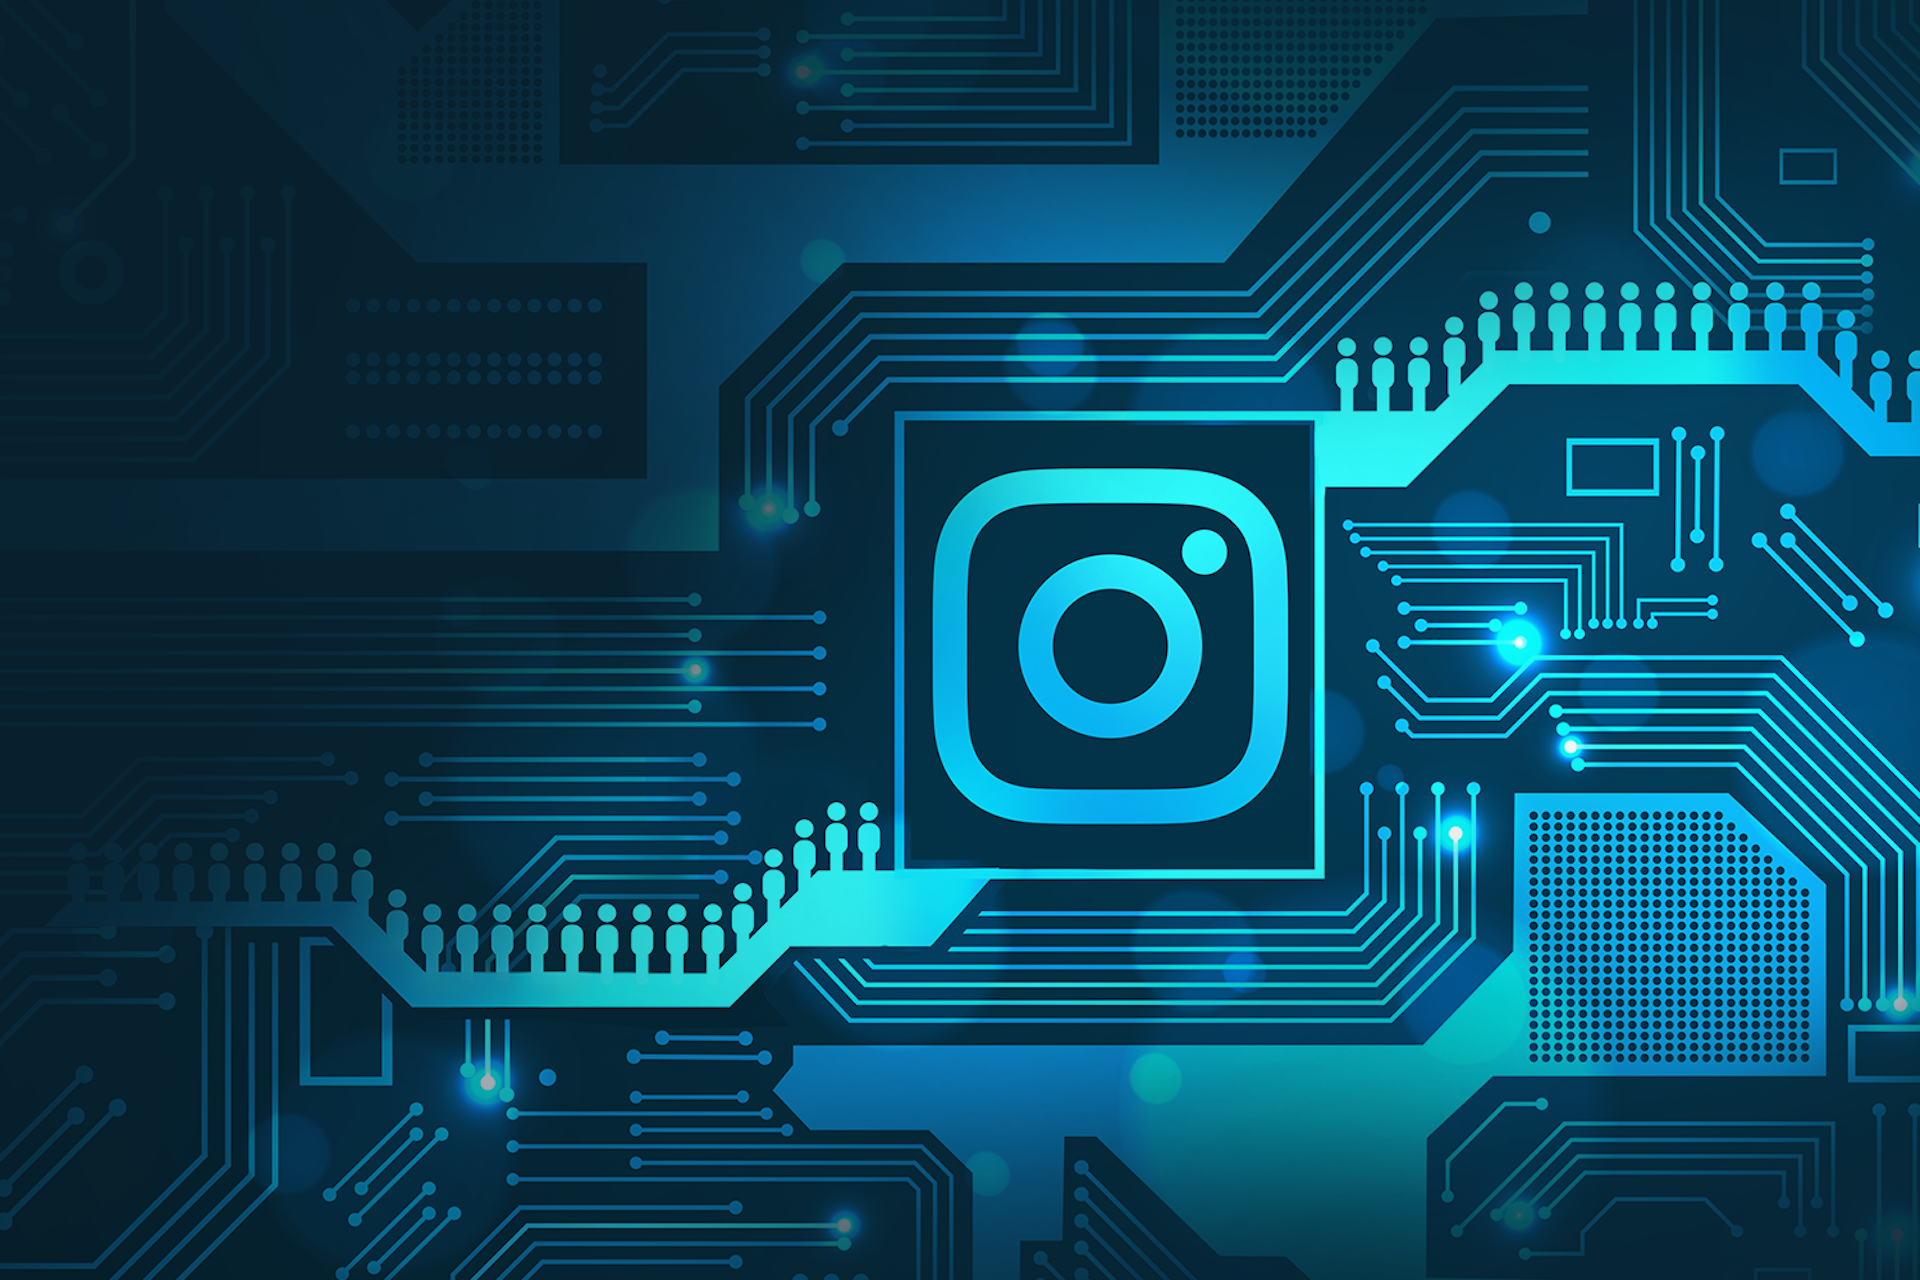 Abstract motherboard graphic with Instagram logo and rows of people.